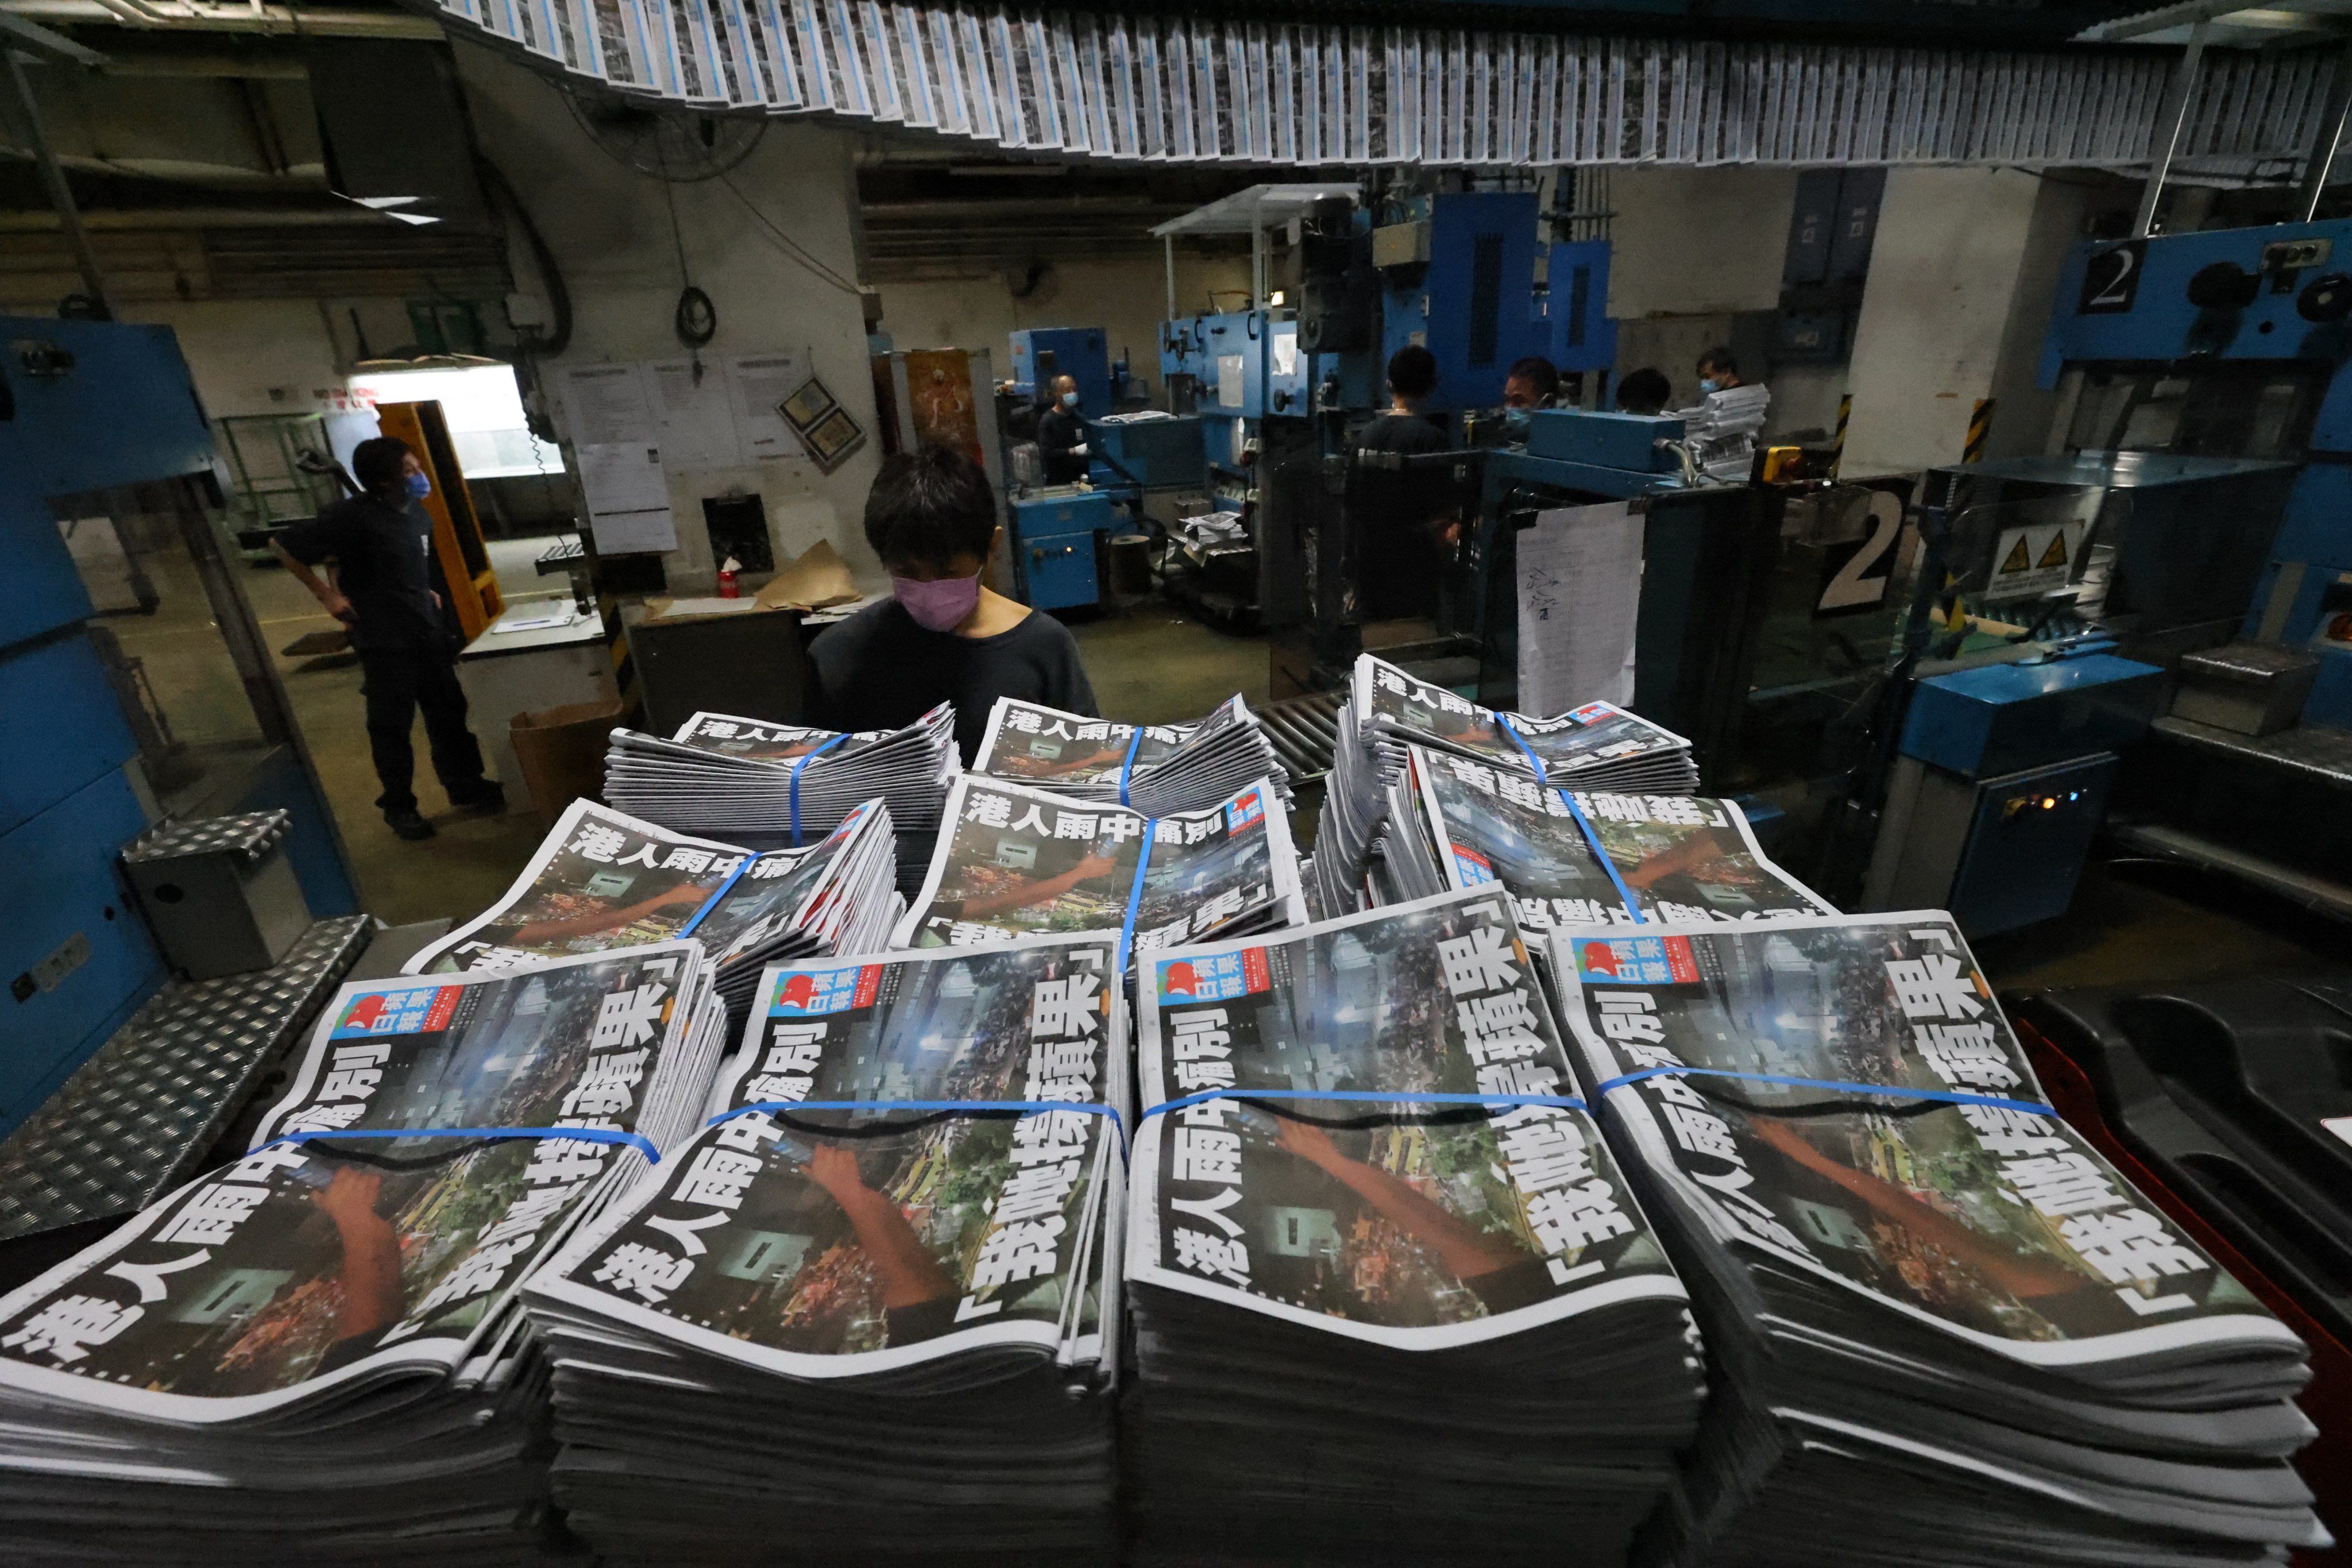 Apple Daily’s printing press. Jimmy Lai’s trial has entered its 41st day. Photo: Dickson Lee